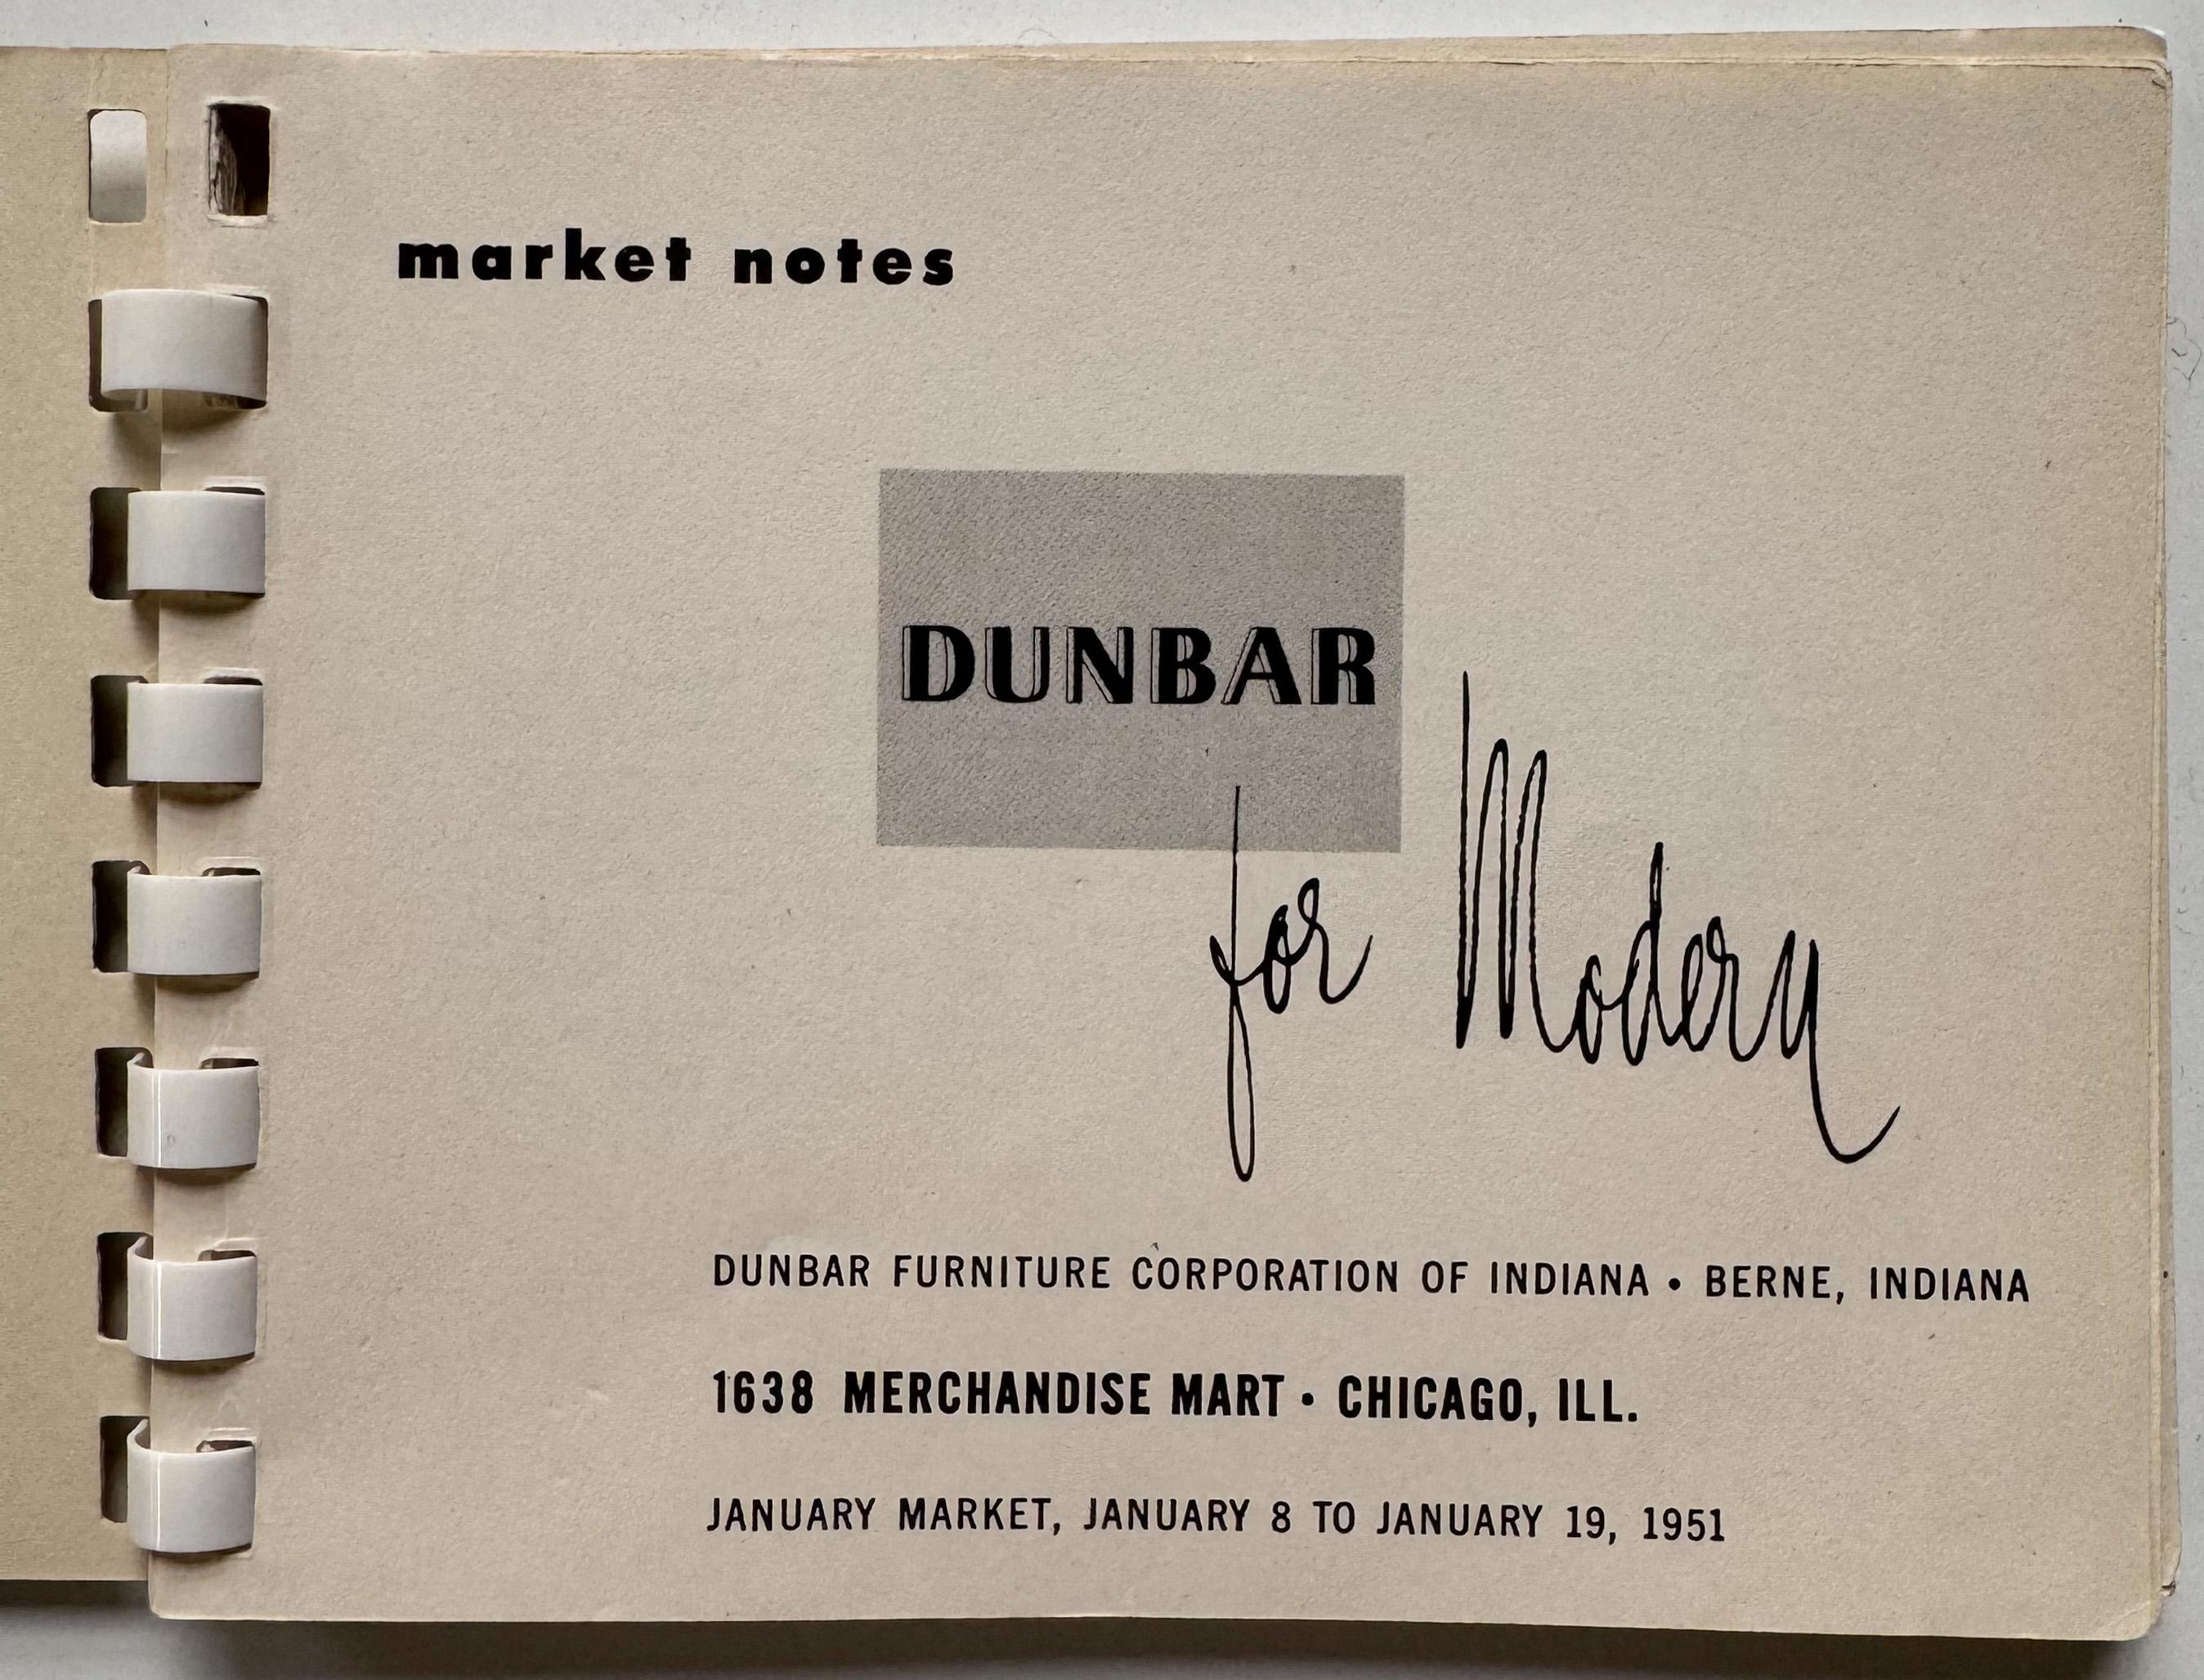 Small format brochure published in January 1951 showcasing 39 Edward Wormley designs for Dunbar Furniture, presented at the Chicago Merchandise Mart. Highlights include the Sleepy Hollow chair, Schoolmaster’s Bench, Long John Coffee Table,